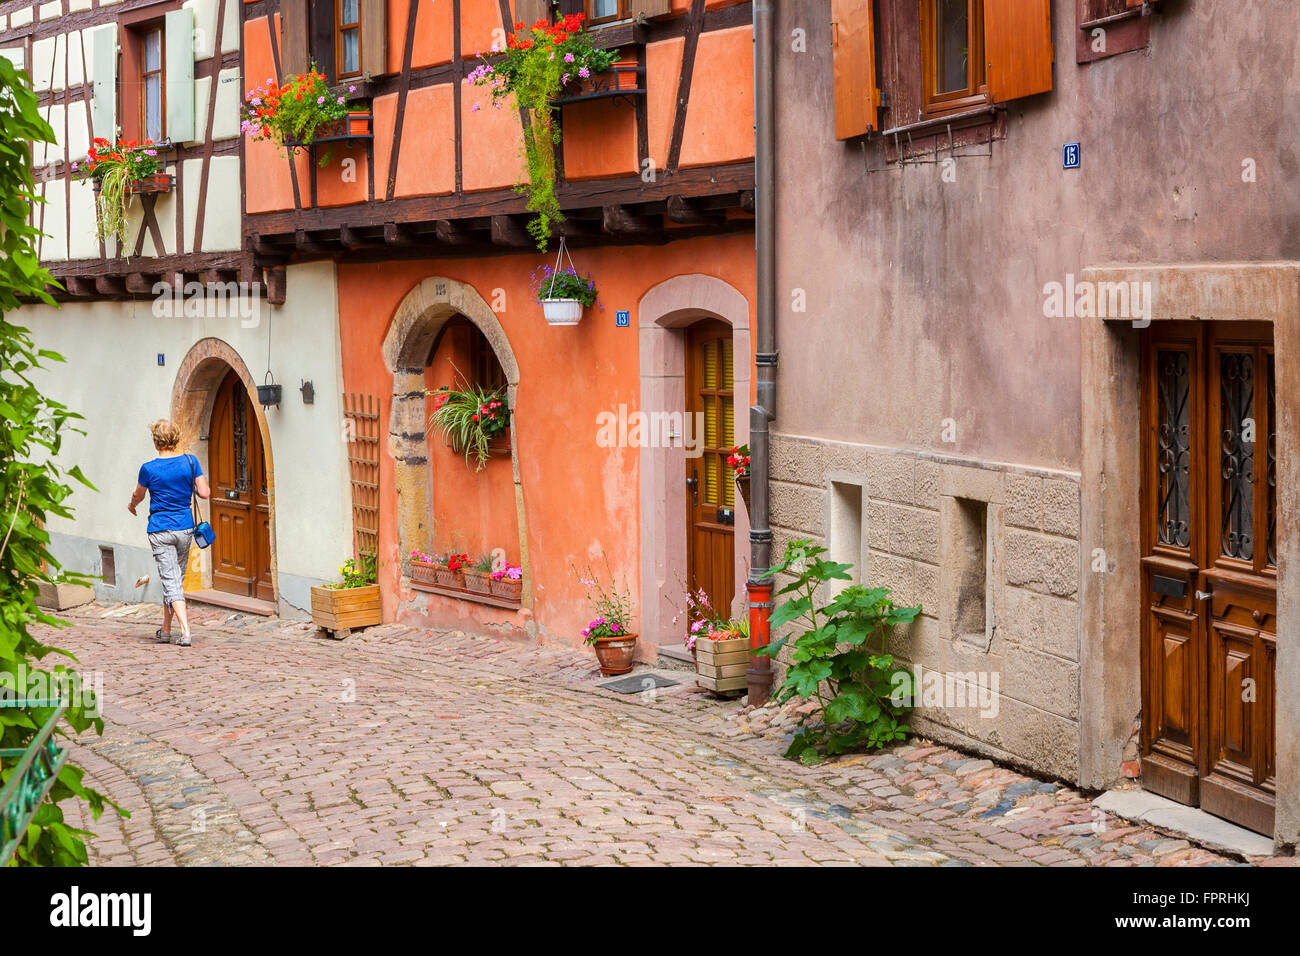 Half-timbered house of Eguisheim along the wine route Alsace, France. Stock Photo